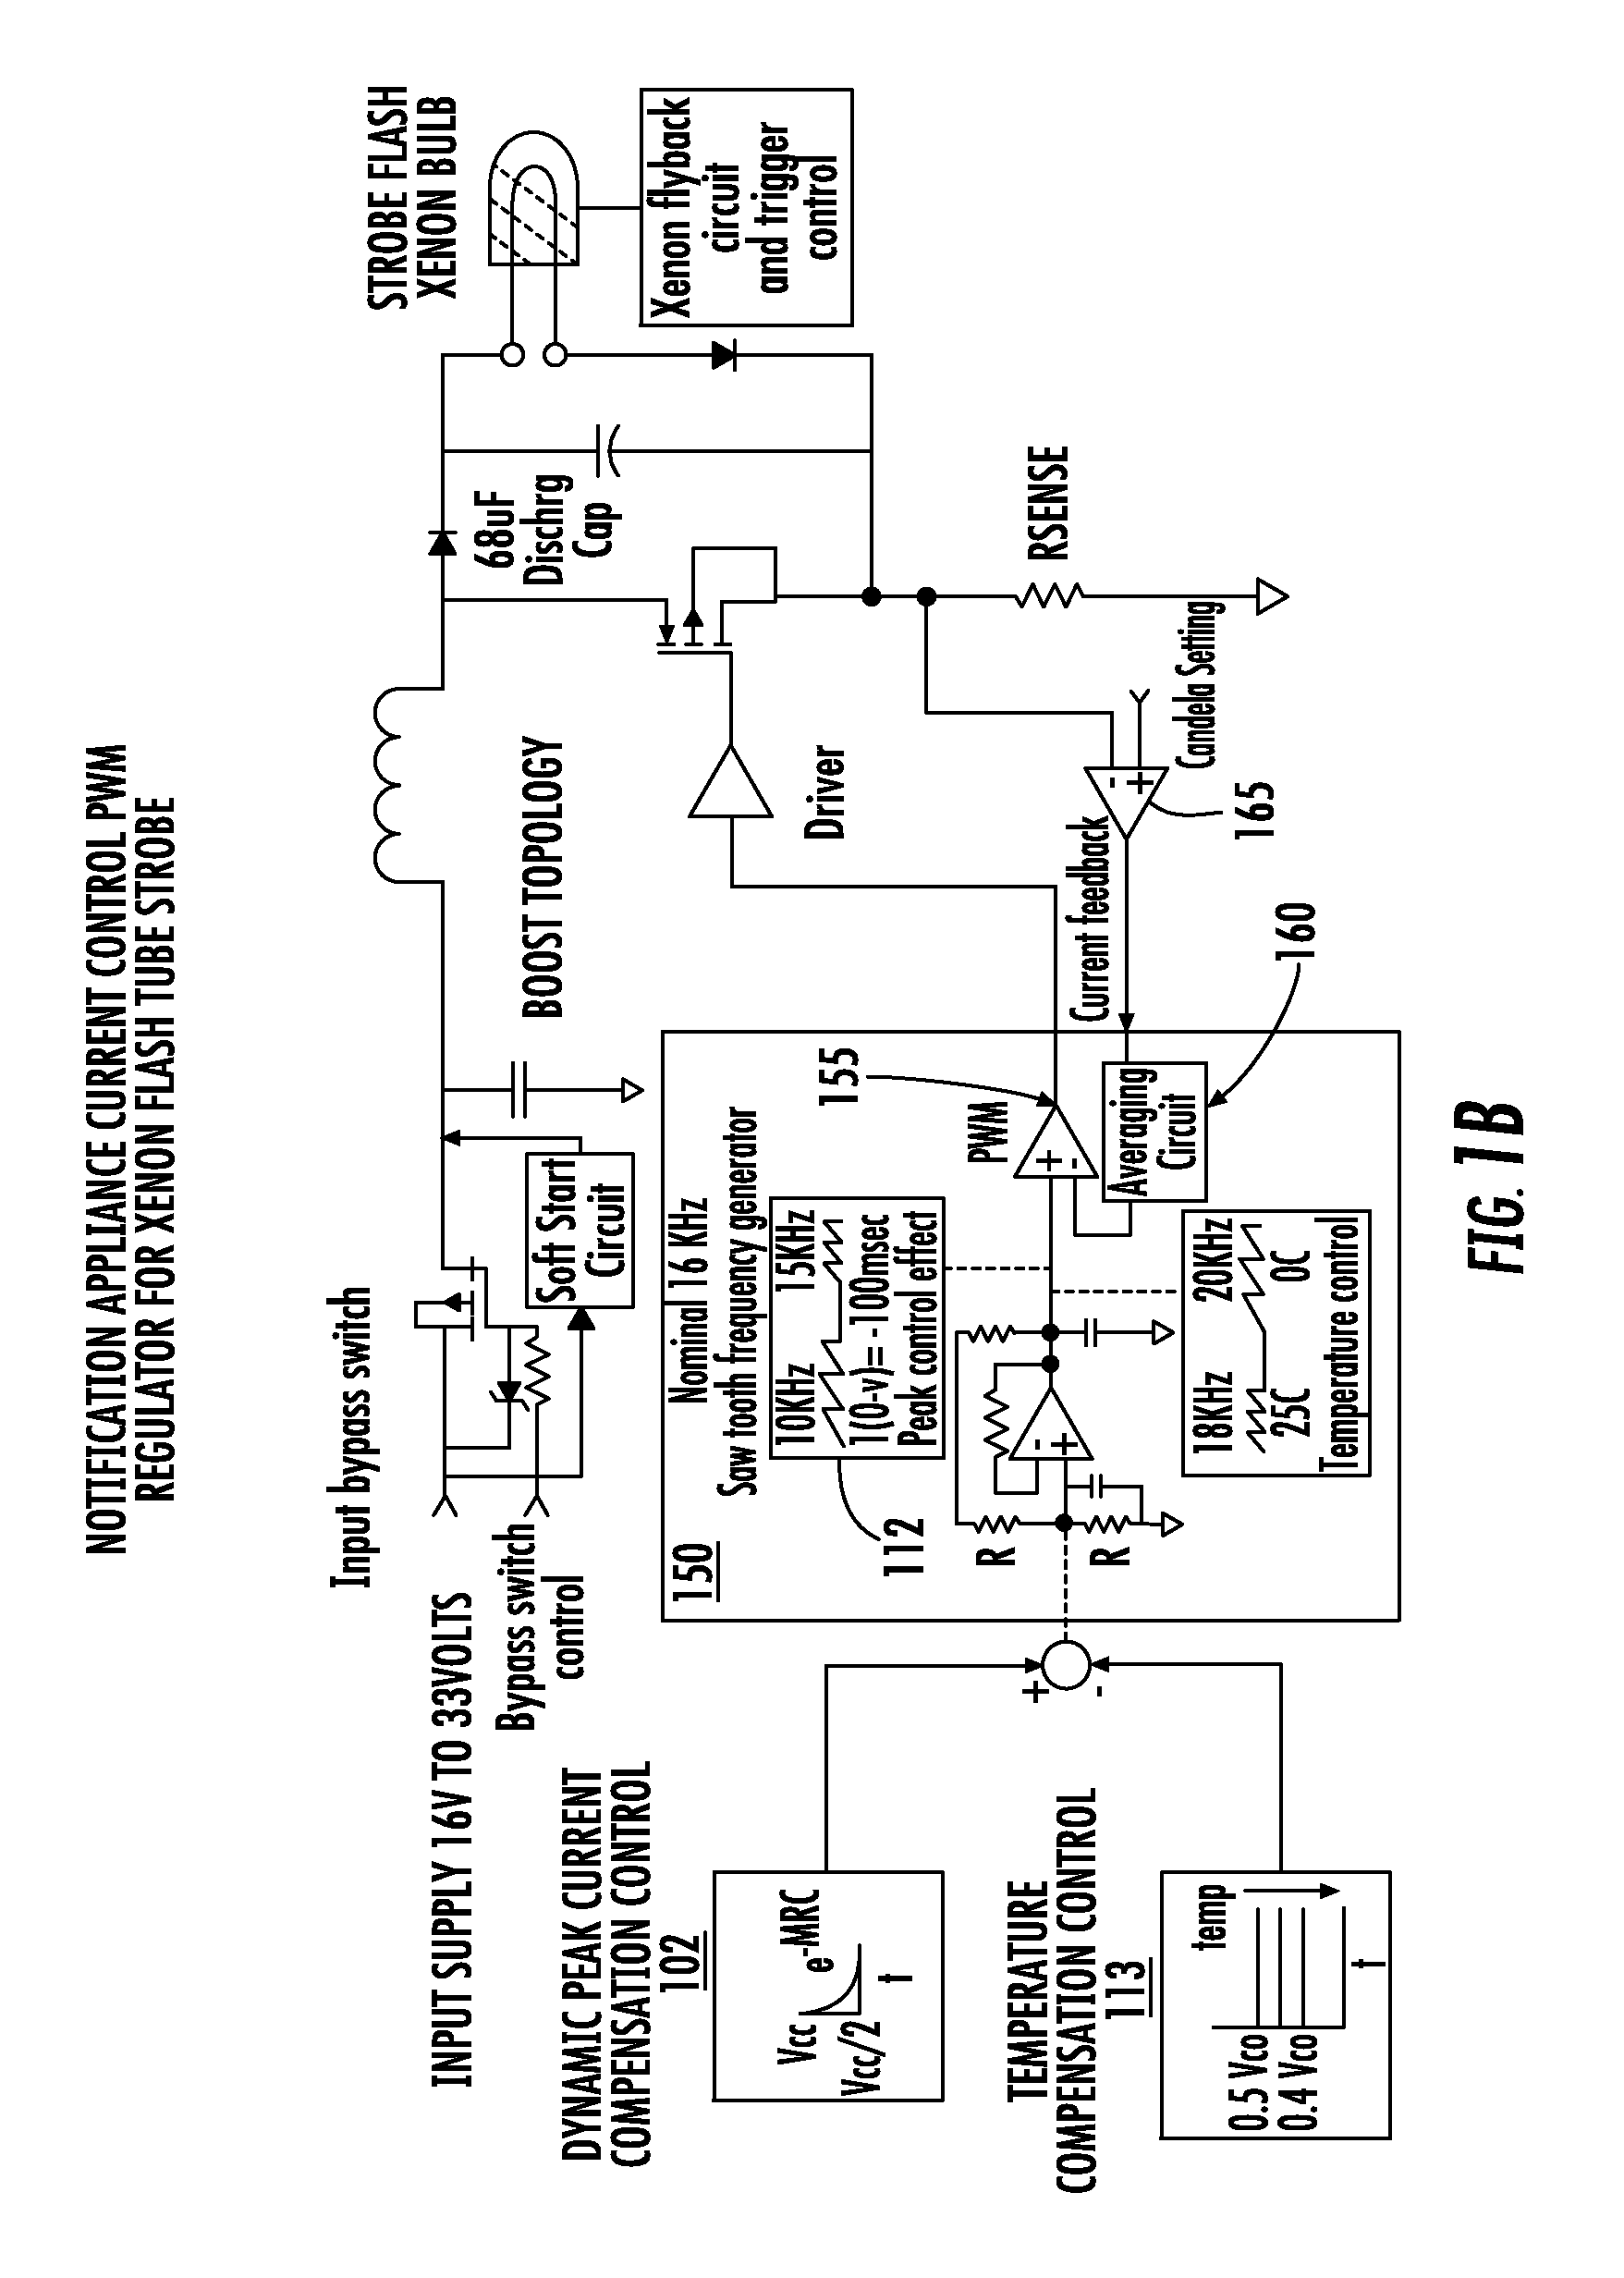 Compensation circuit for current peaking reduction in notification appliances